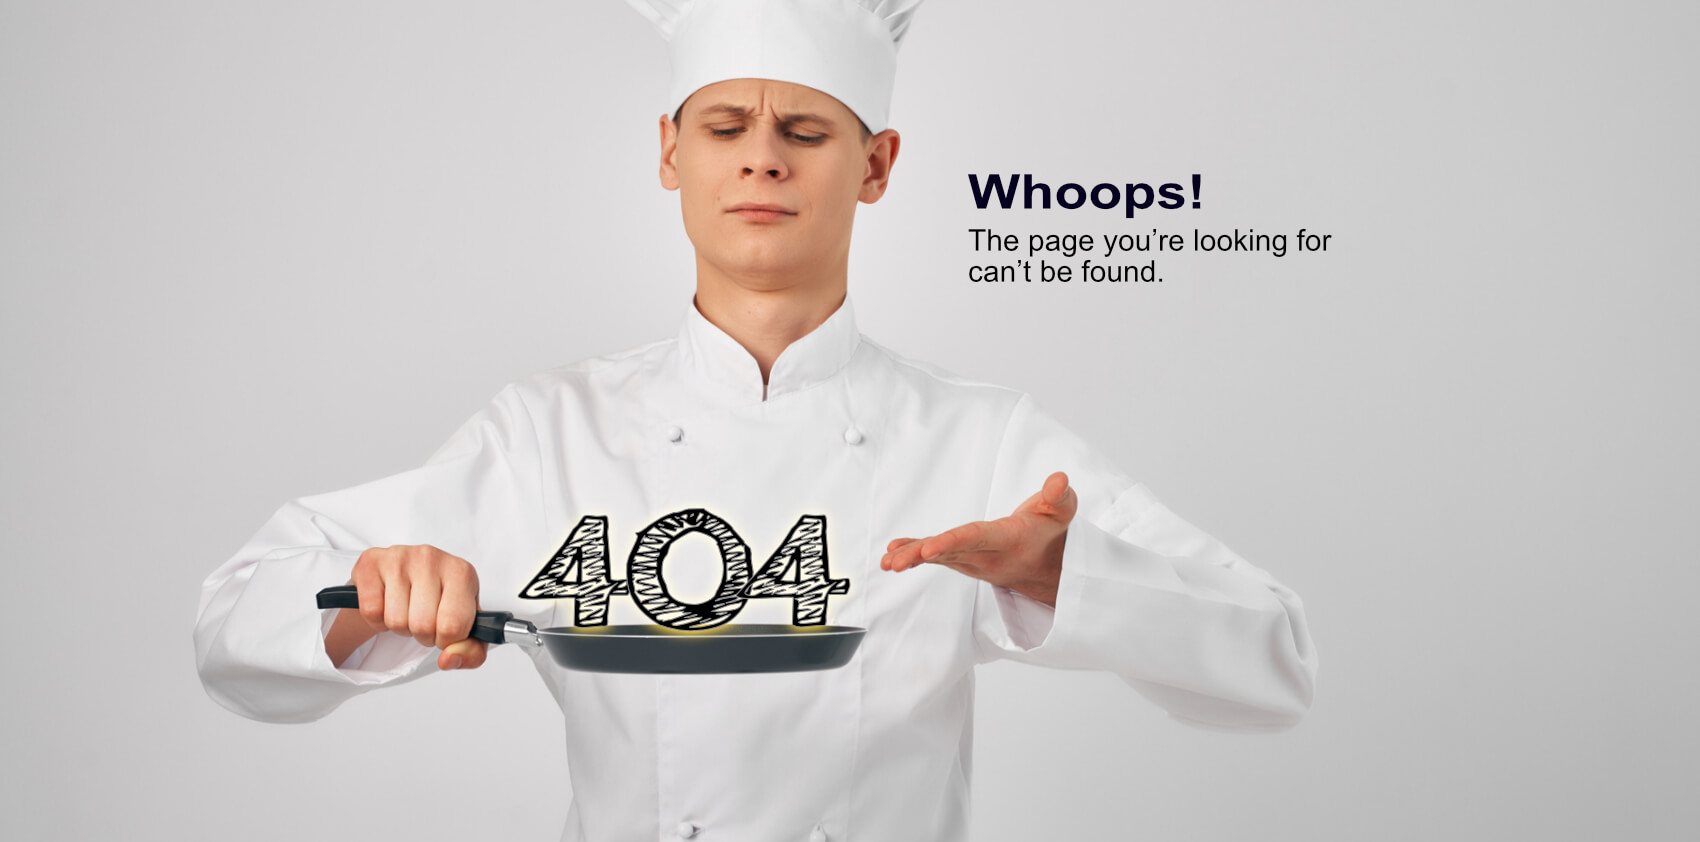 You've come to our 404 Page. The link you have used is incorrect.